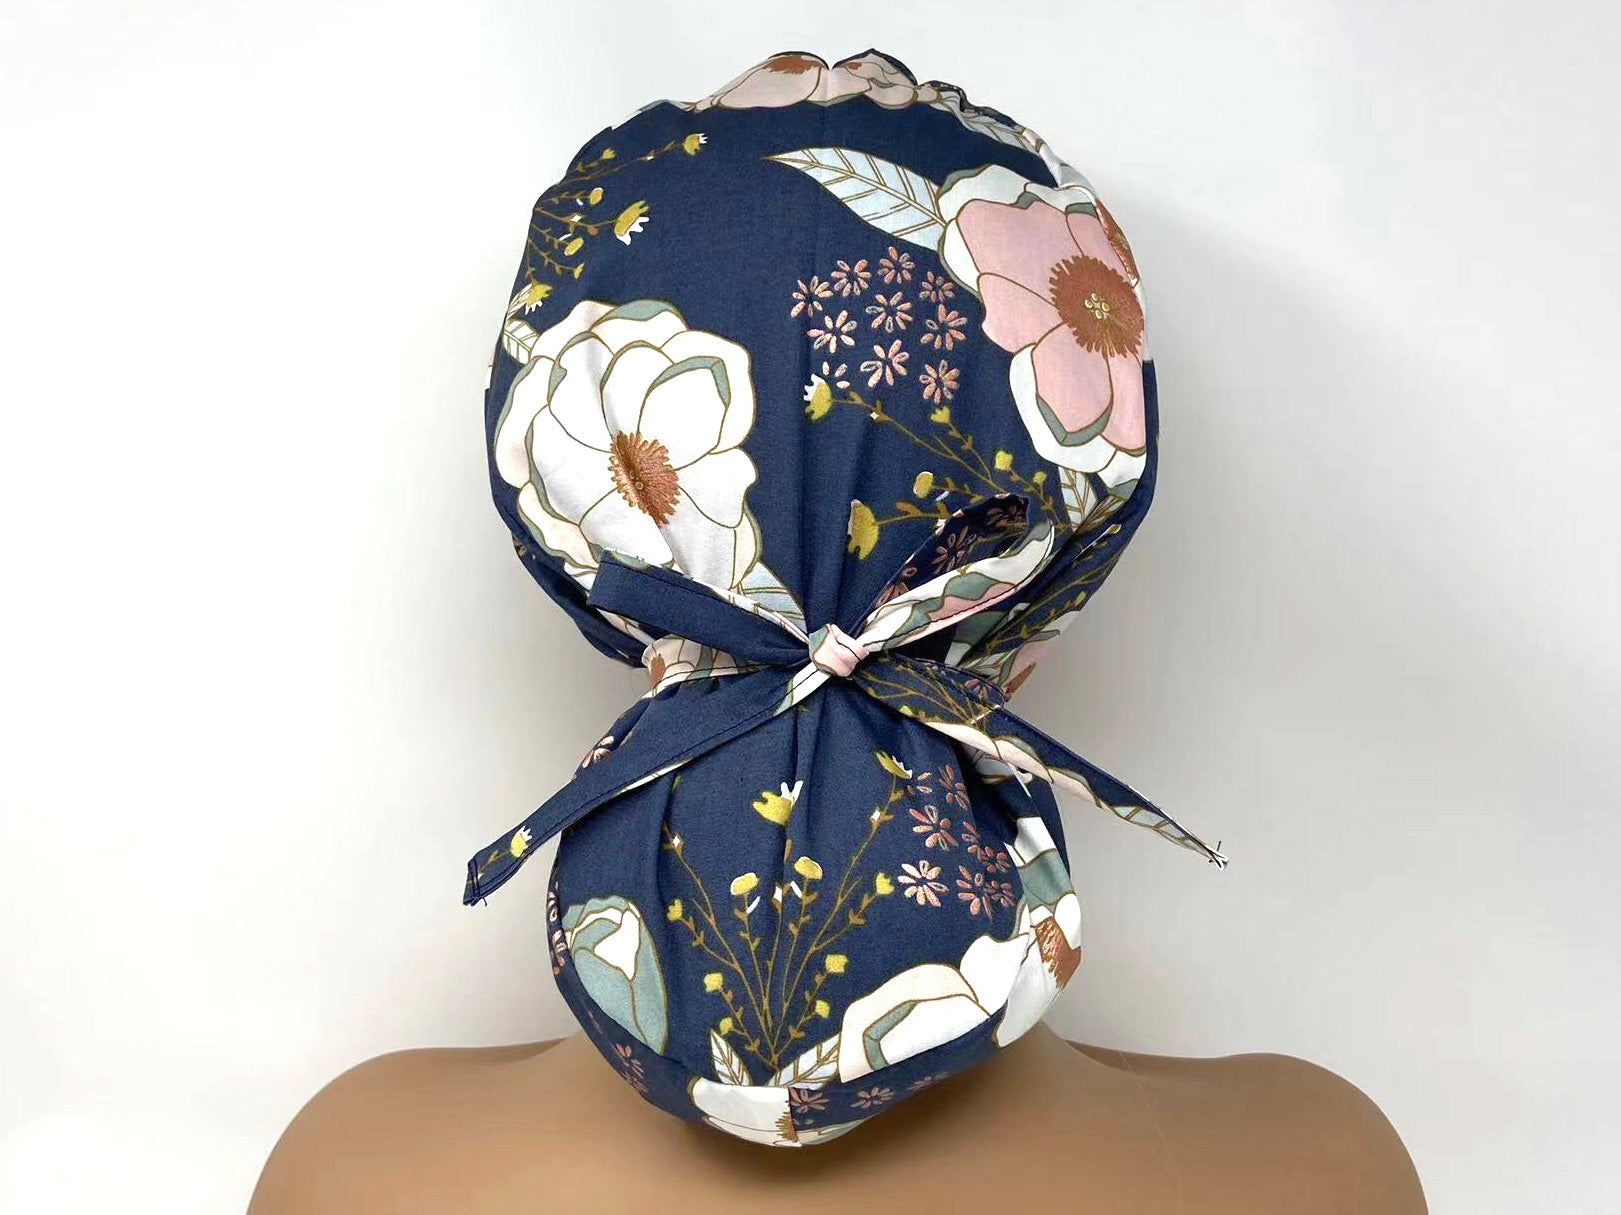 Large Pink Floral with Rose Gold Prints on Grey - Ponytail